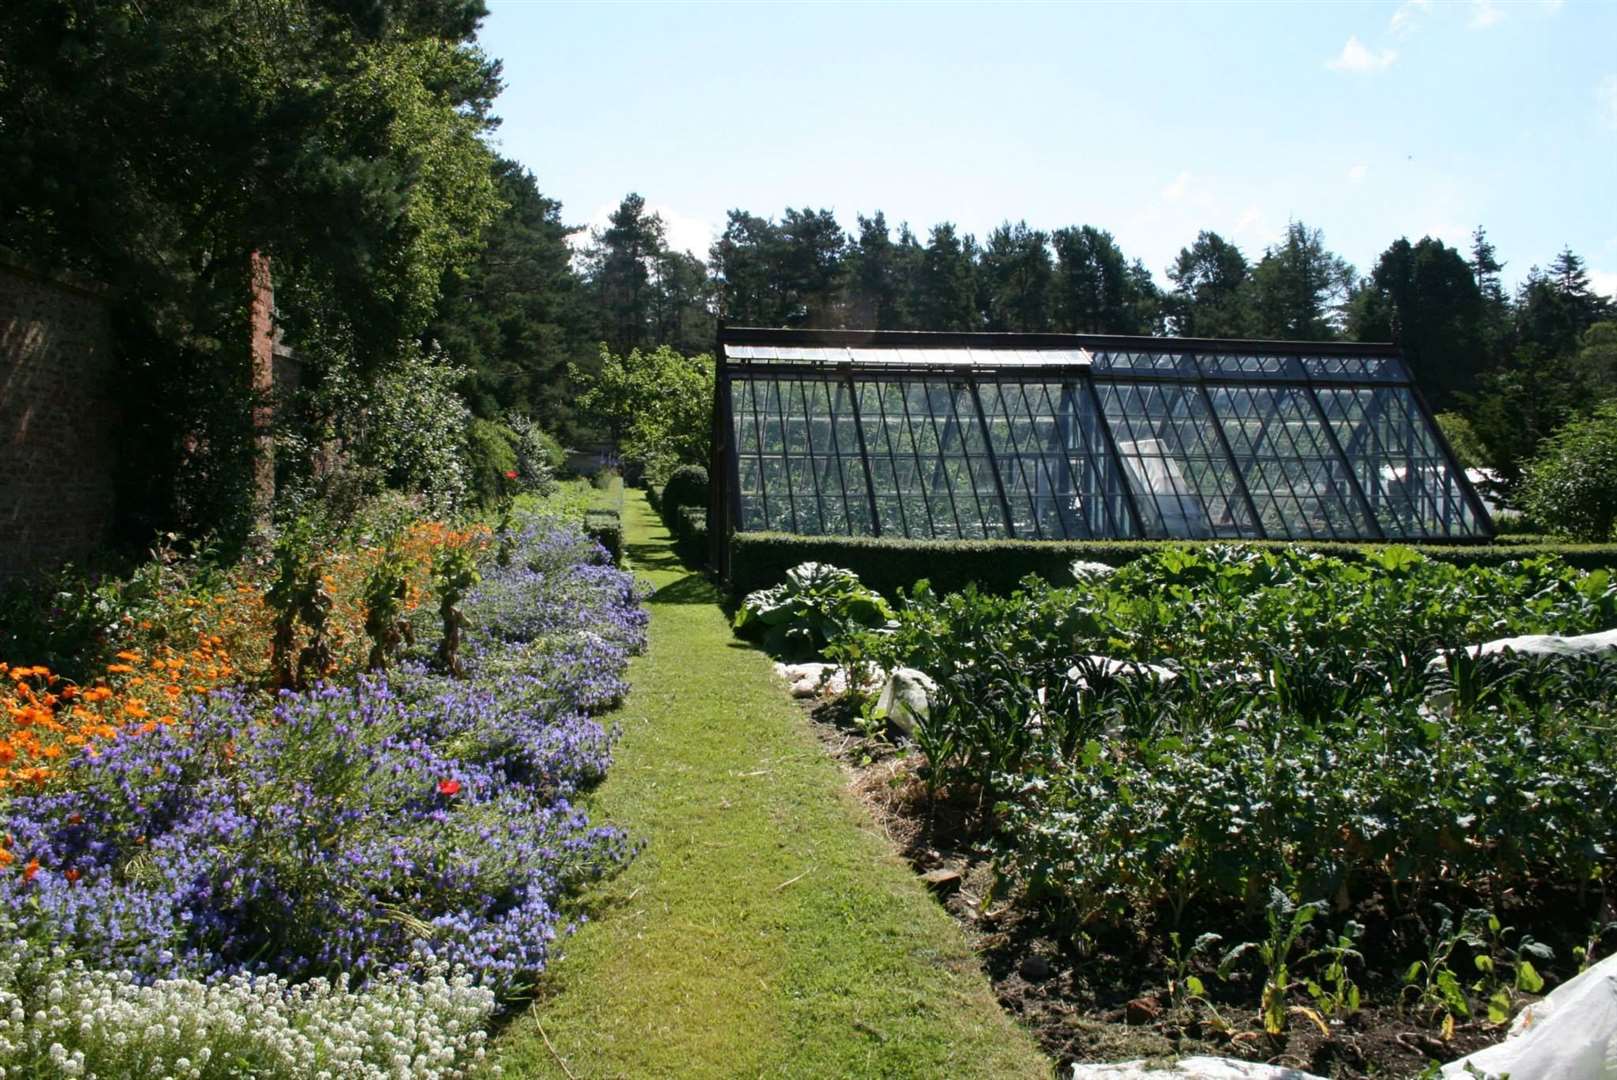 The walled gardens at the back of Newbold House in full bloom during the summer.